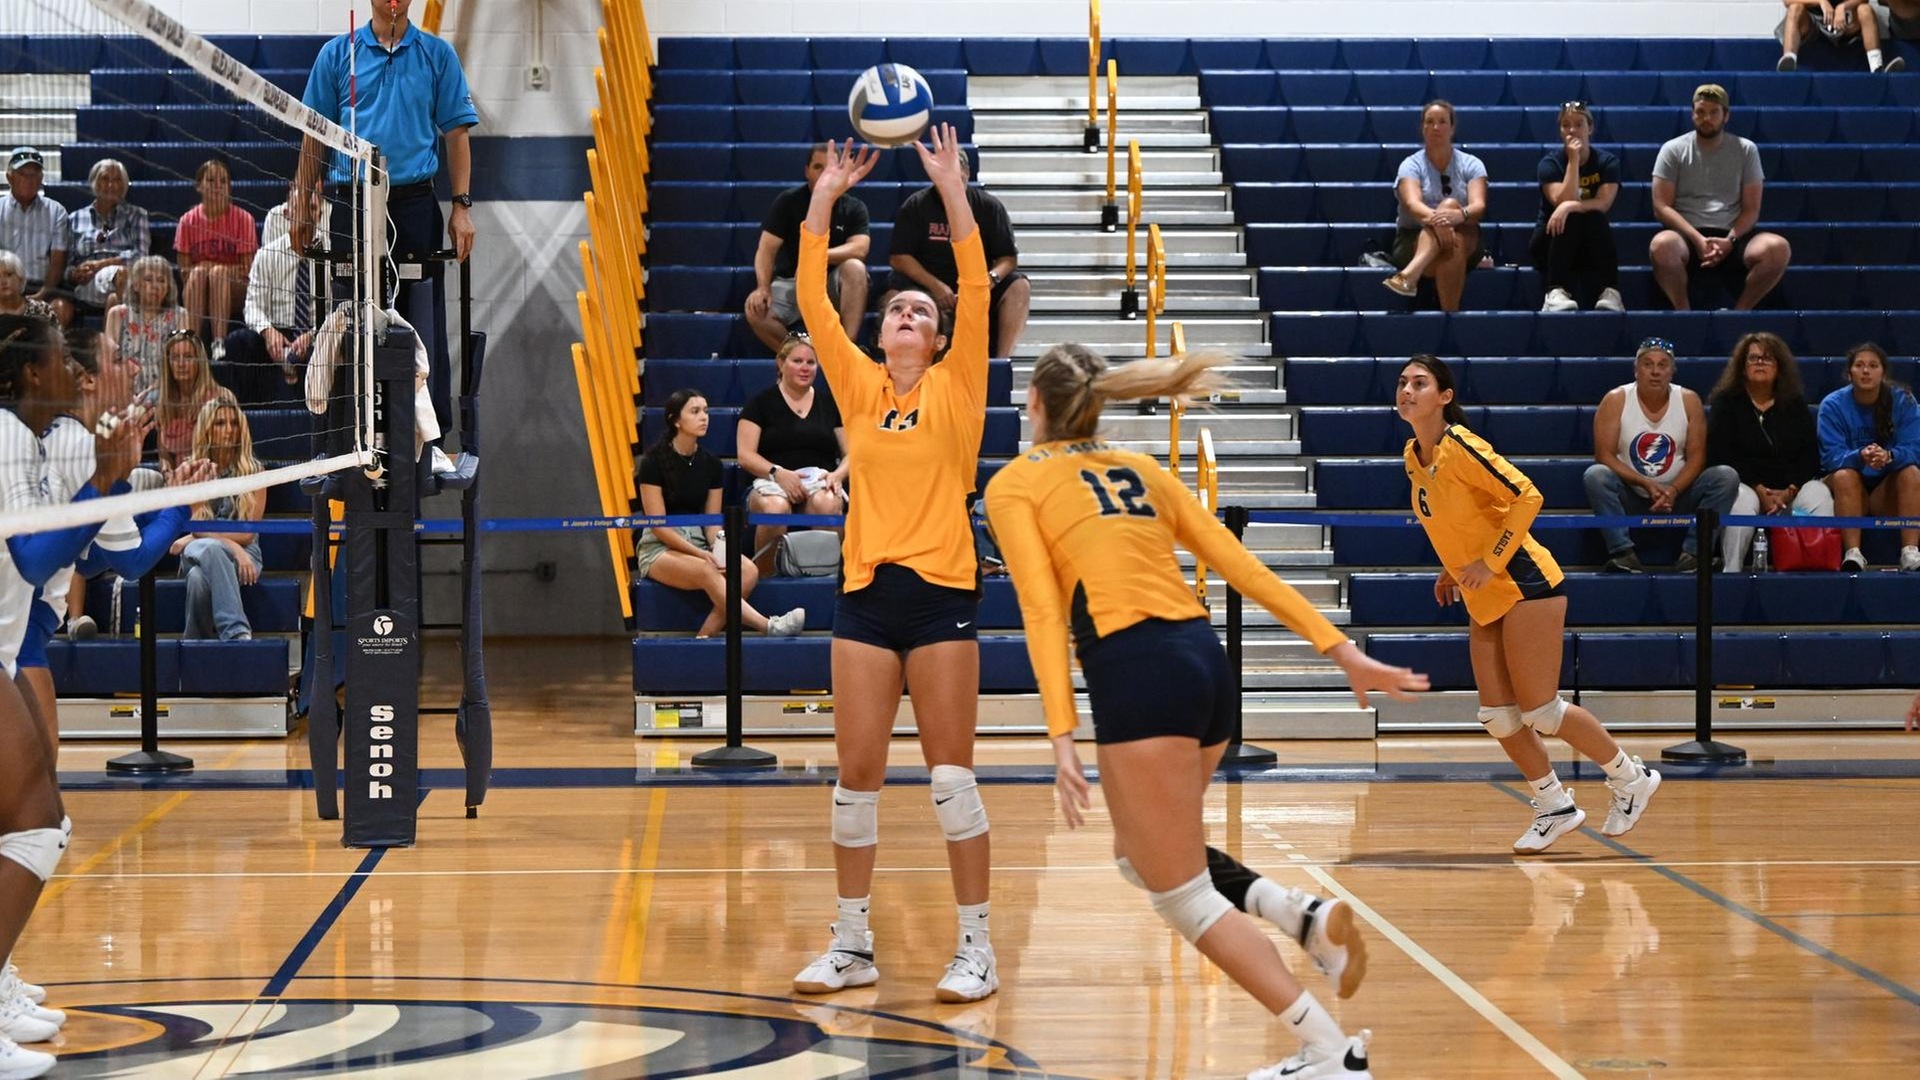 Women's Volleyball Suffers Non-Conference Loss to Hunter, 3-1